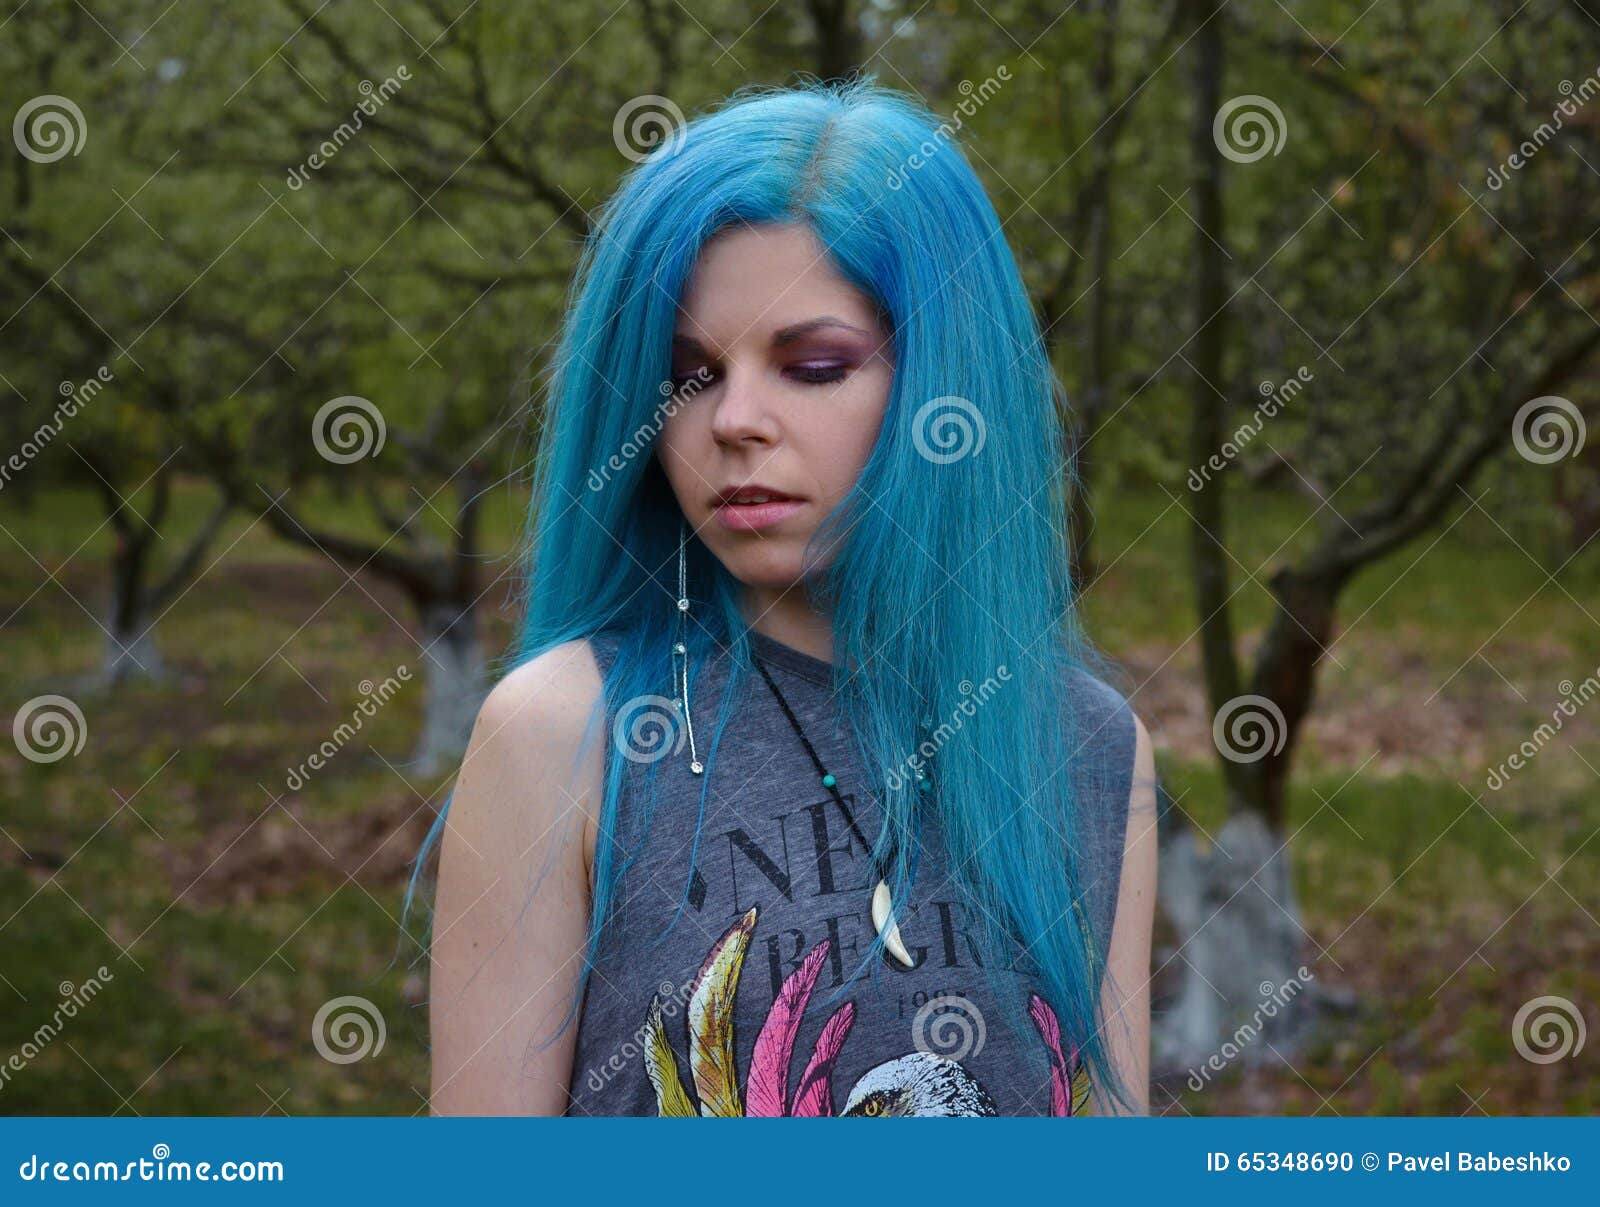 Haired girl blue the Fairy with